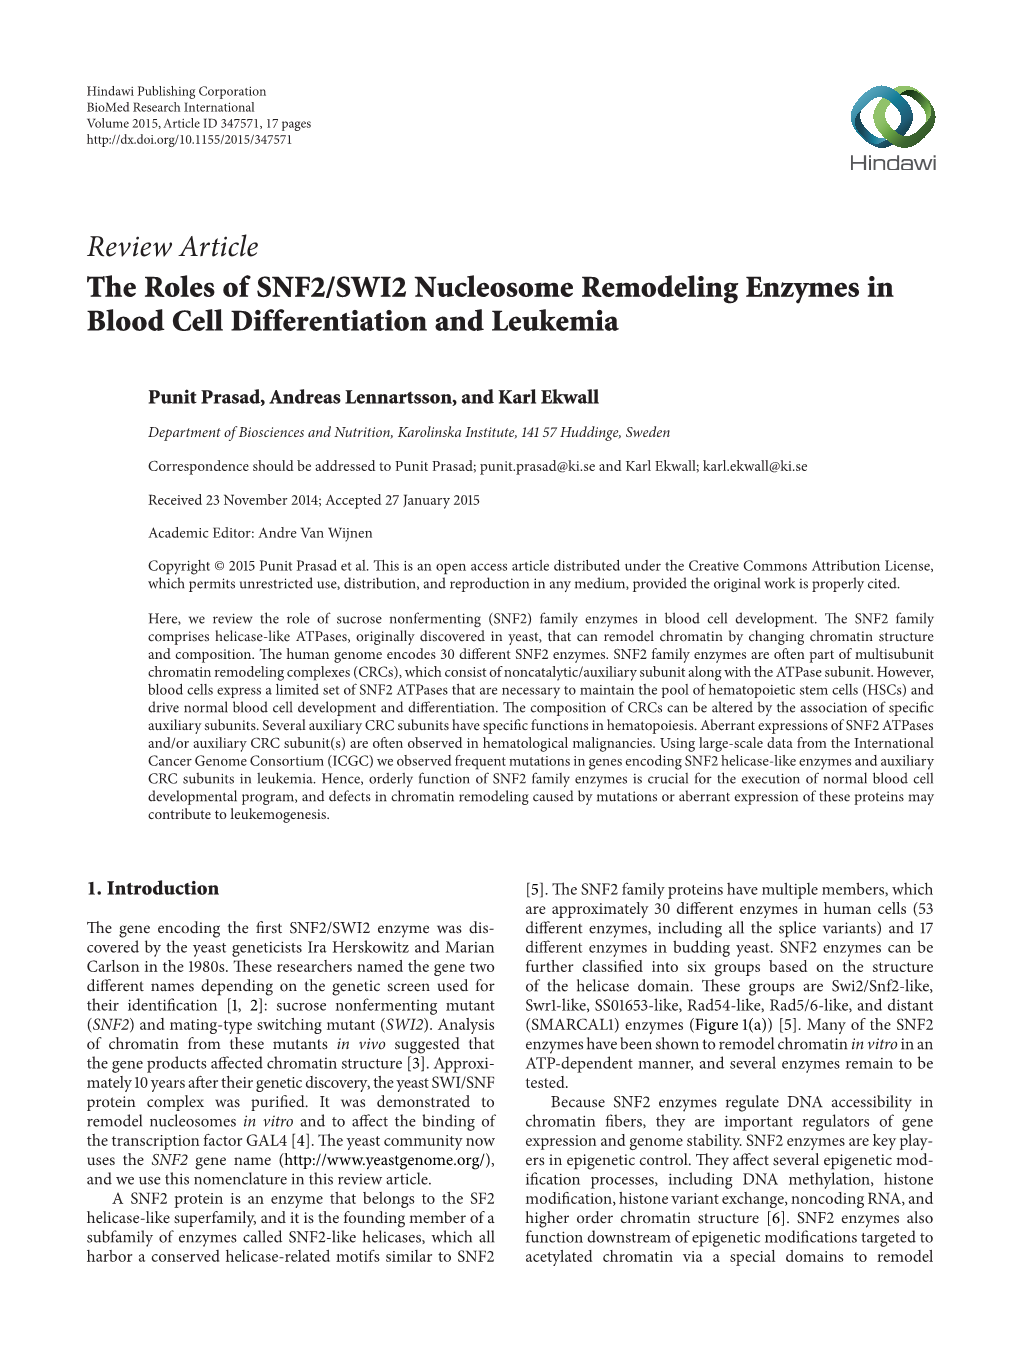 The Roles of SNF2/SWI2 Nucleosome Remodeling Enzymes in Blood Cell Differentiation and Leukemia